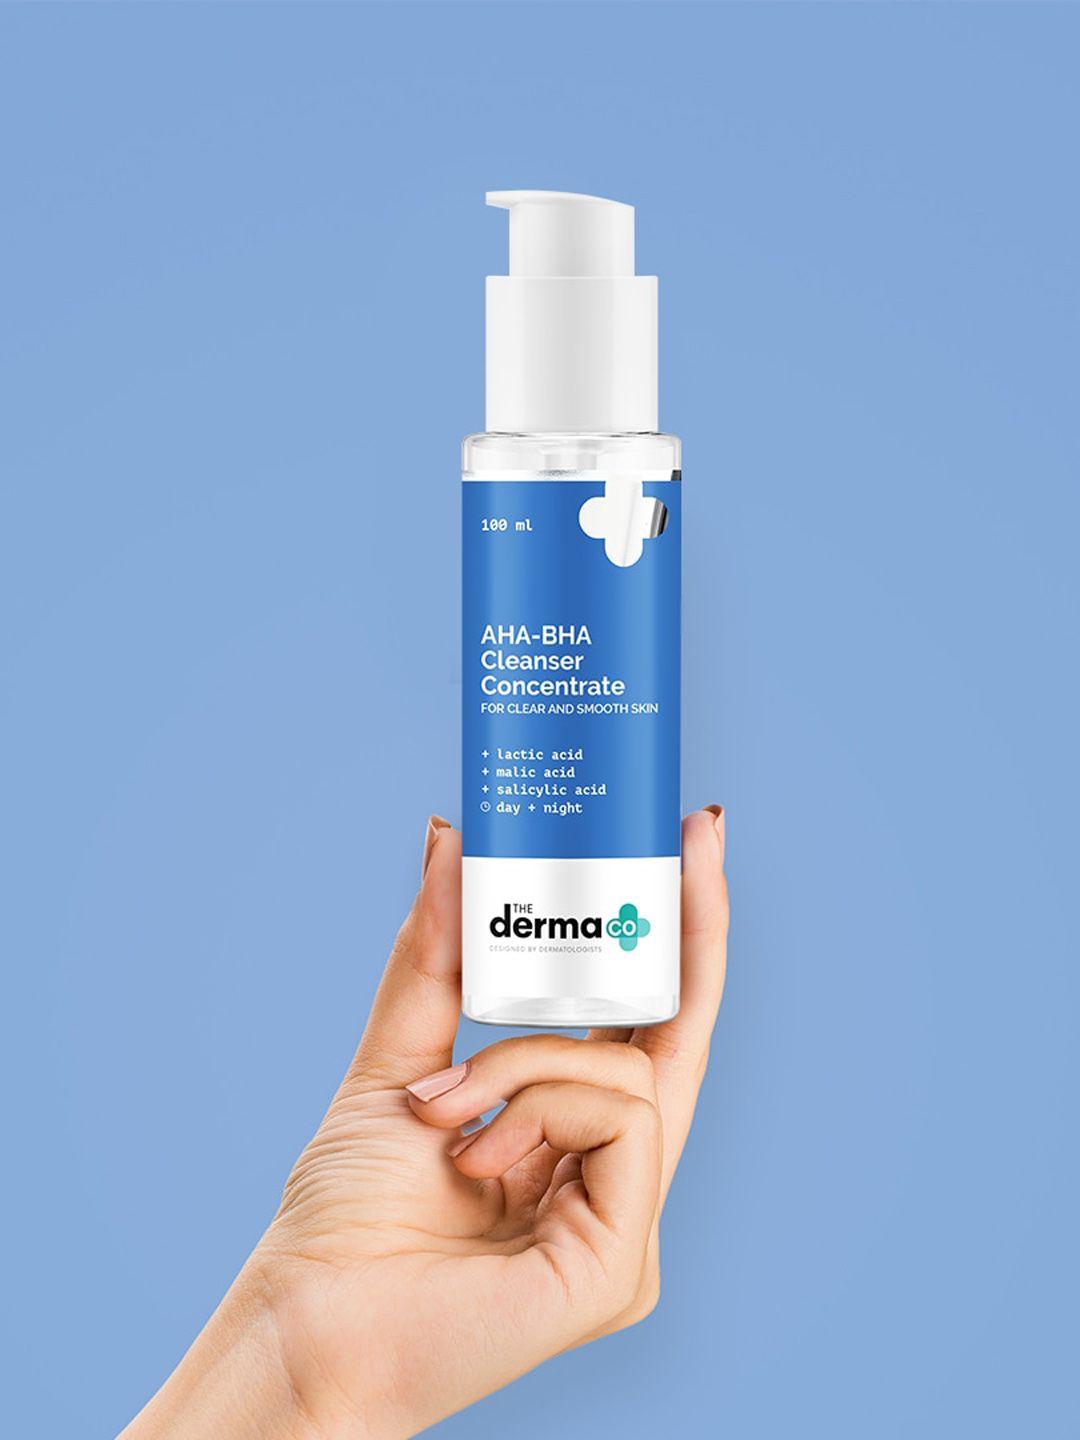 the derma co. aha bha cleanser concentrate